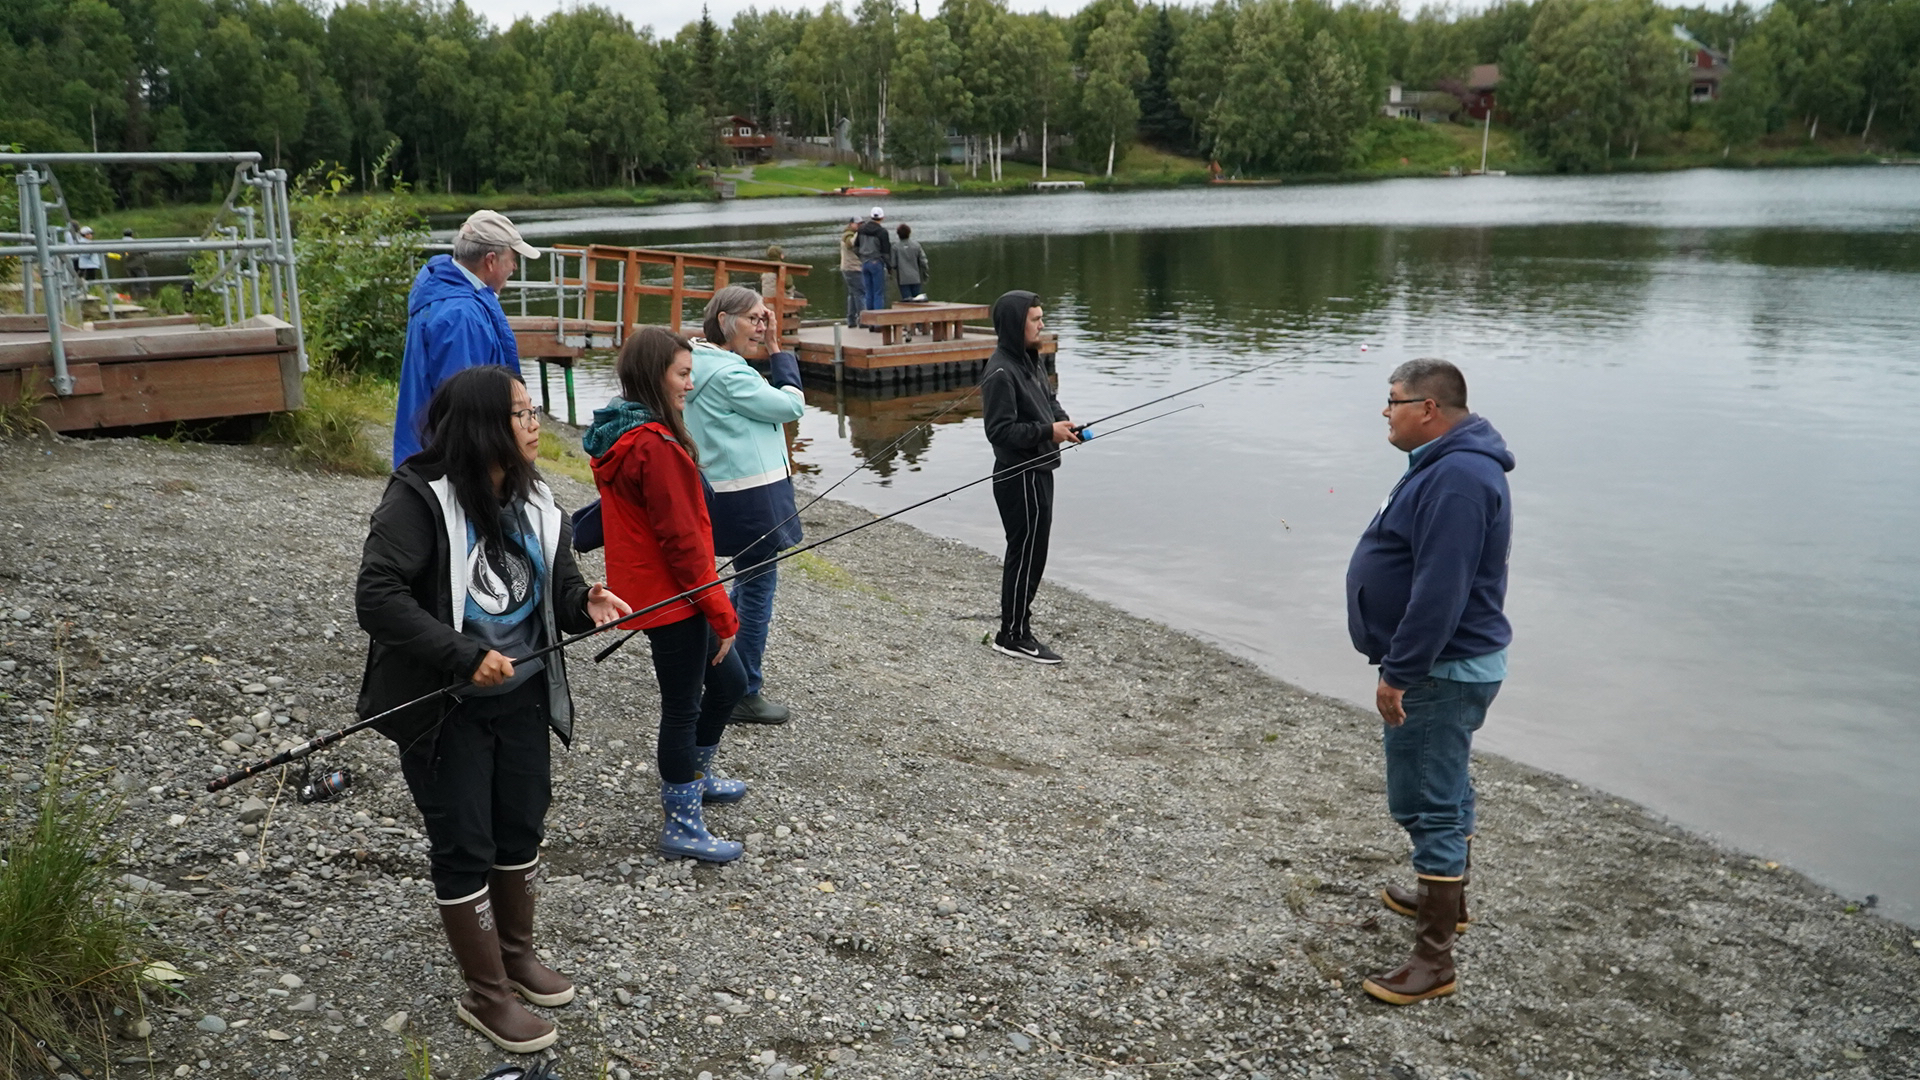 Fishermen gather on a lakeshore to learn about rainbow trout.